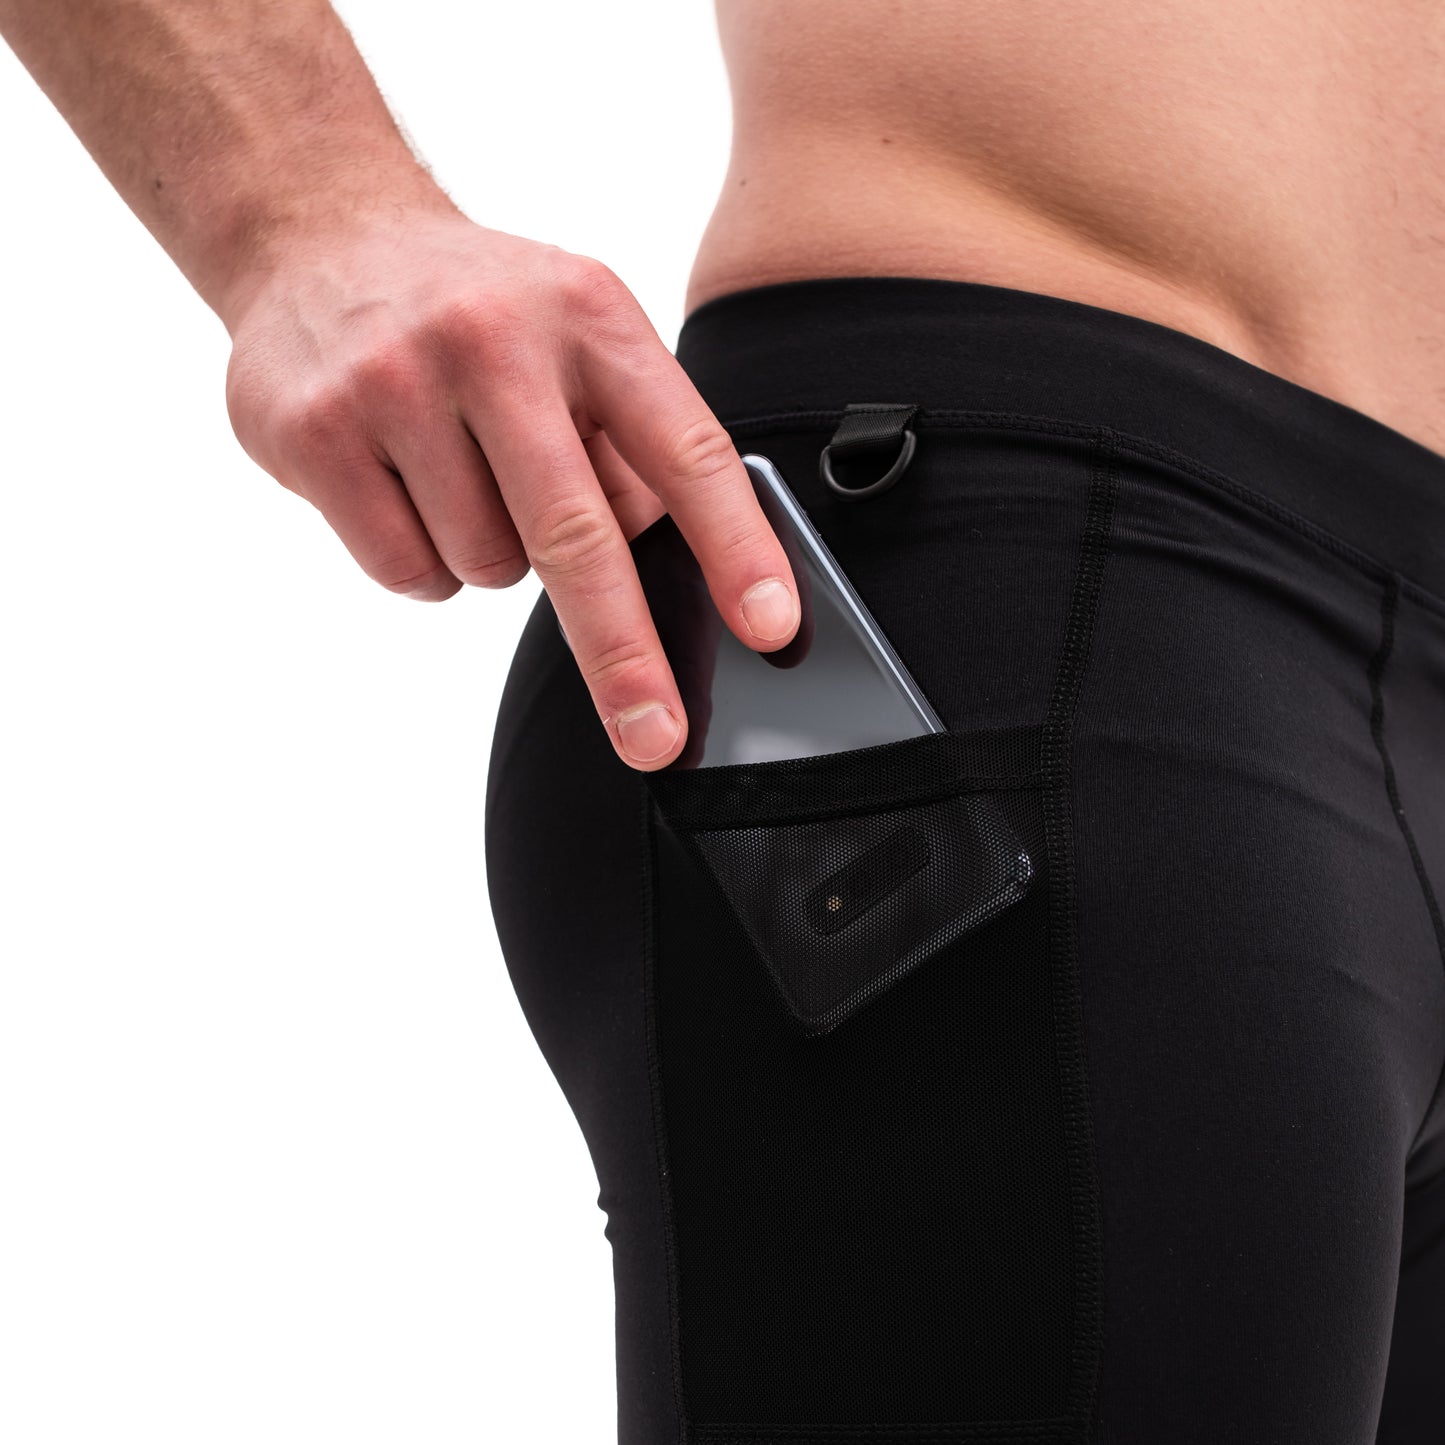 Men's Compression Pants for sale in Bacolod City